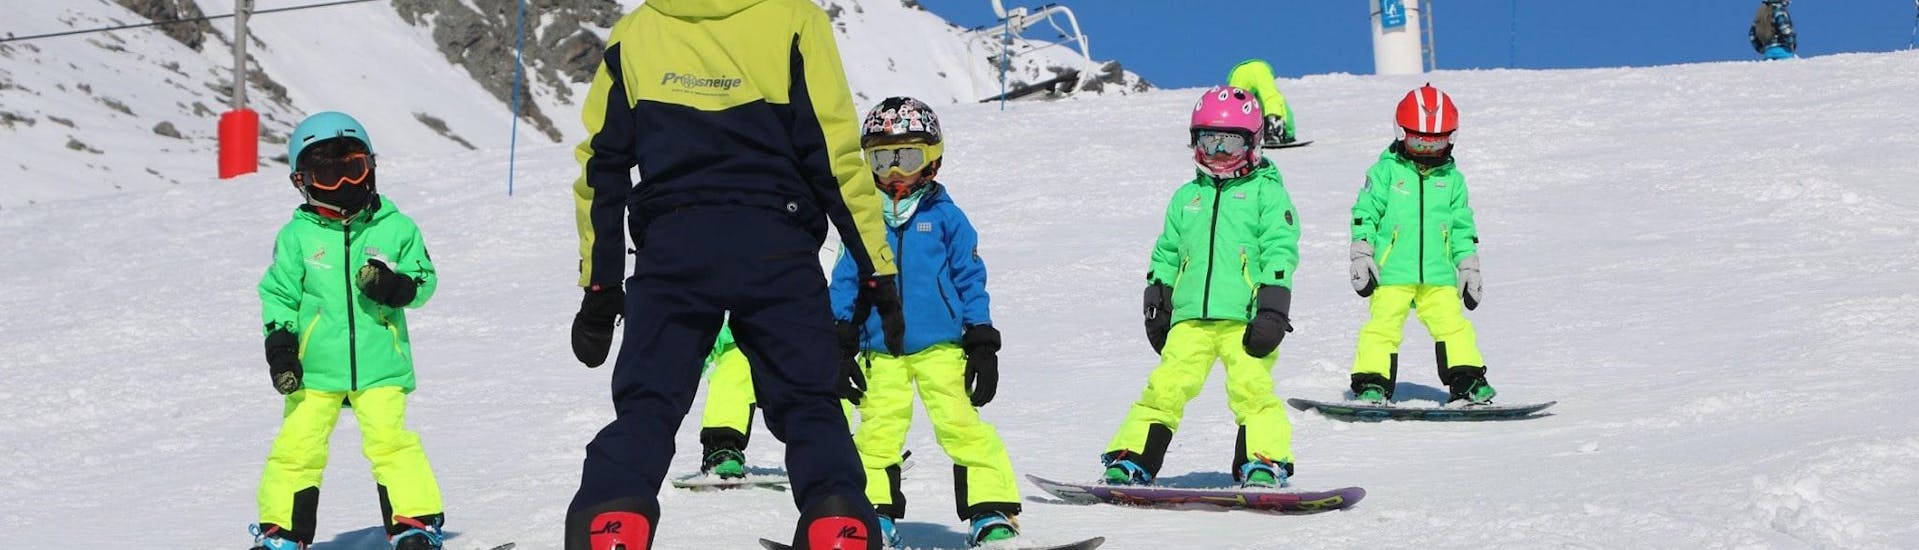 An instructor fro the ski school Prosneige Val Thorens & Les Menuires is teaching smiling kids during Kids Snowboarding Lessons (5-13 y.) for All Levels.